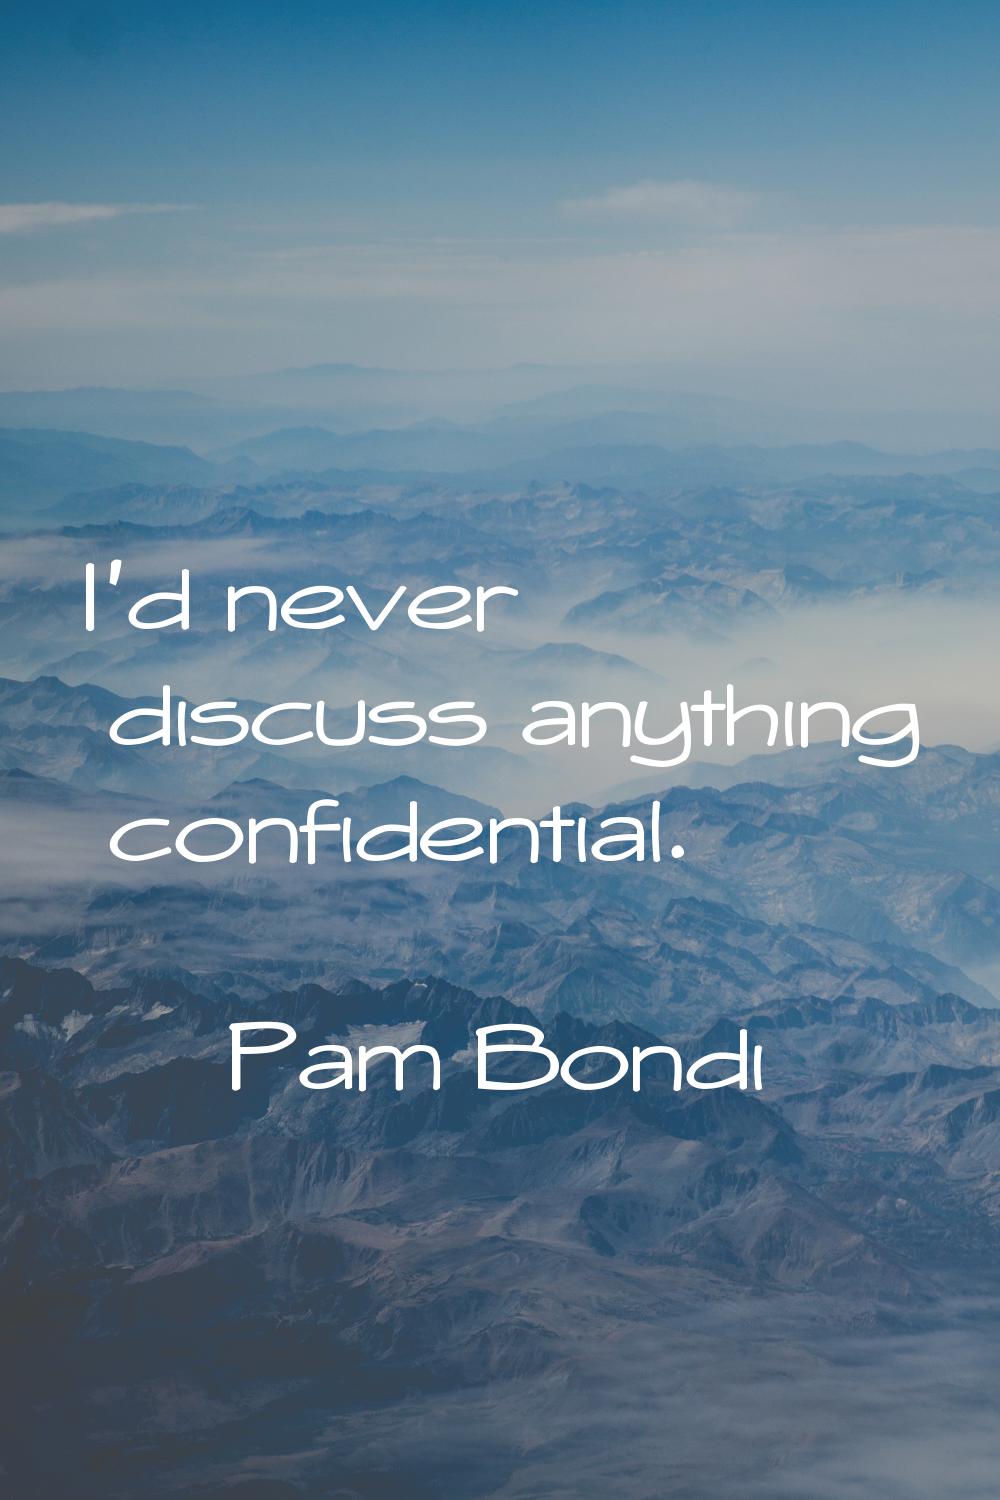 I'd never discuss anything confidential.